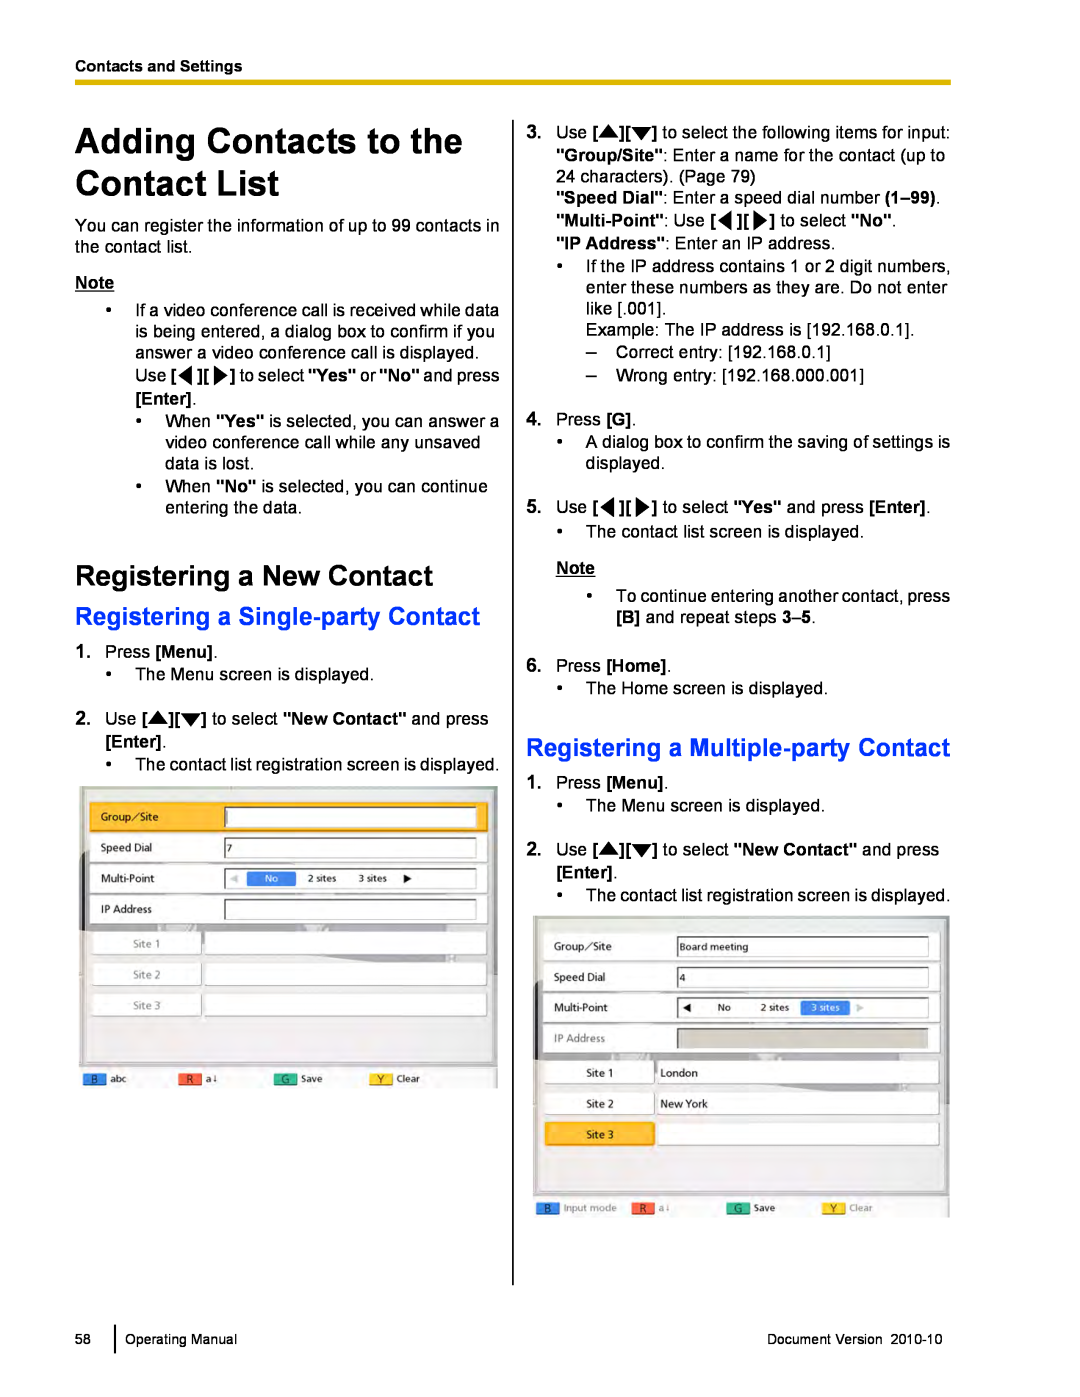 Panasonic KX-VC500 manual Adding Contacts to the Contact List, Registering a New Contact 